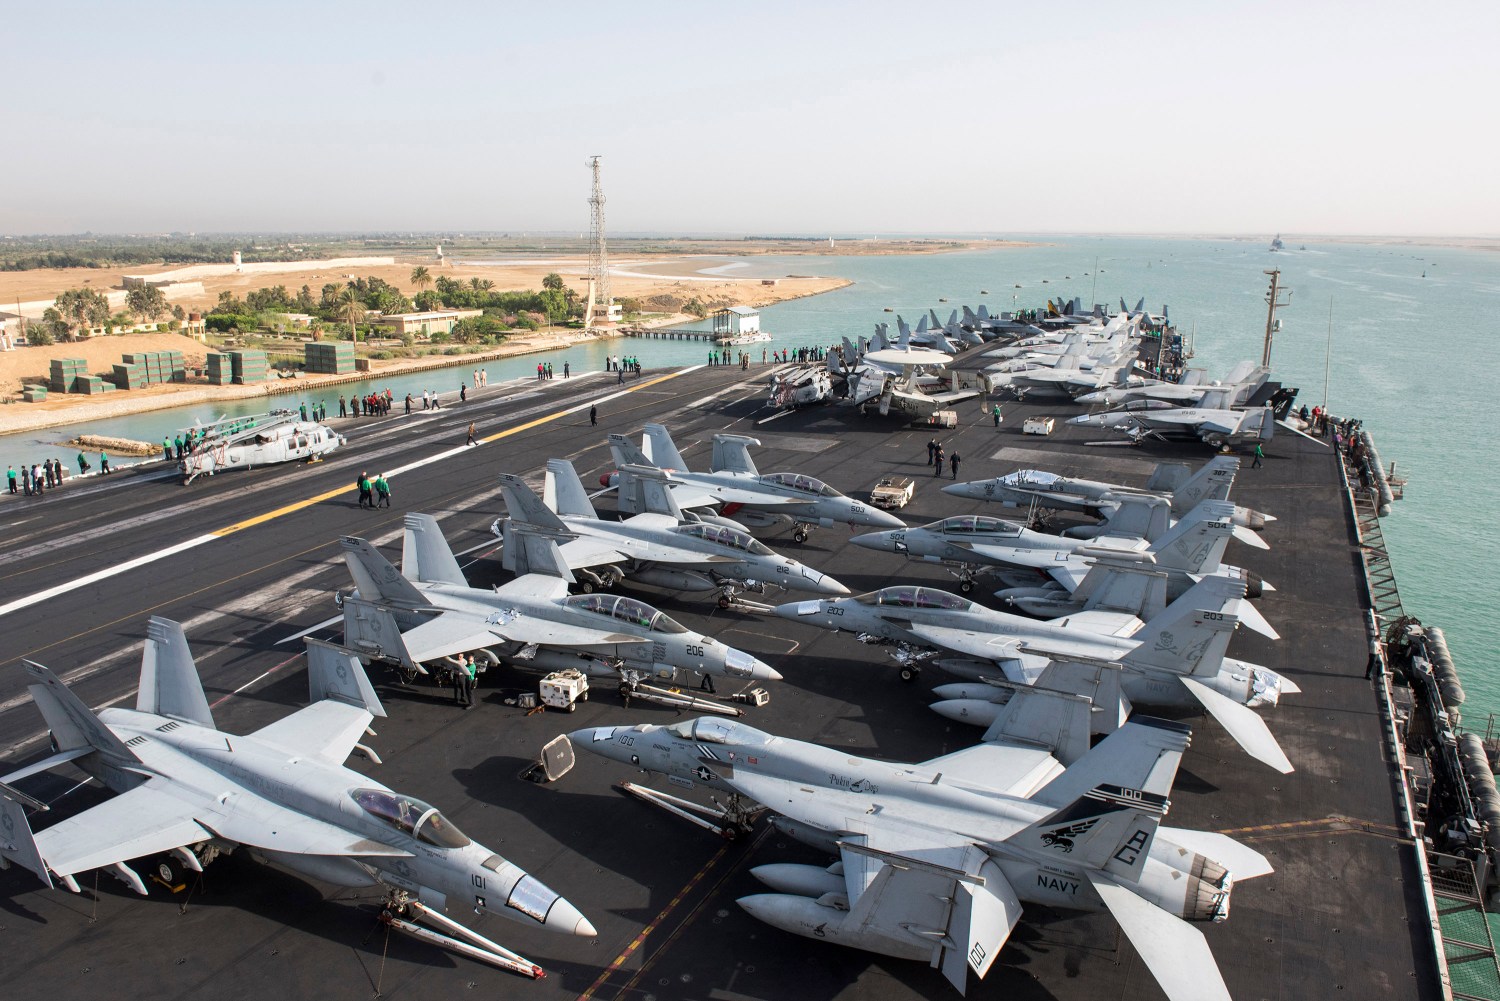 The US Navy aircraft carrier USS Harry S. Truman transits the Suez Canal, Egypt towards the Mediterranean Sea in a photo released by the US Navy June 2, 2016. U.S. fighter jets on Friday launched strikes against Islamic State from the USS Harry S. Truman aircraft carrier, the U.S. Navy said, marking the first time a U.S. aircraft carrier targeted areas in the Middle East from the Mediterranean since the Iraq War began in 2003.    U.S. Navy/Mass Communication Specialist 3rd Class Anthony Flynn/Handout via REUTERS   ATTENTION EDITORS - THIS PICTURE WAS PROVIDED BY A THIRD PARTY. FOR EDITORIAL USE ONLY